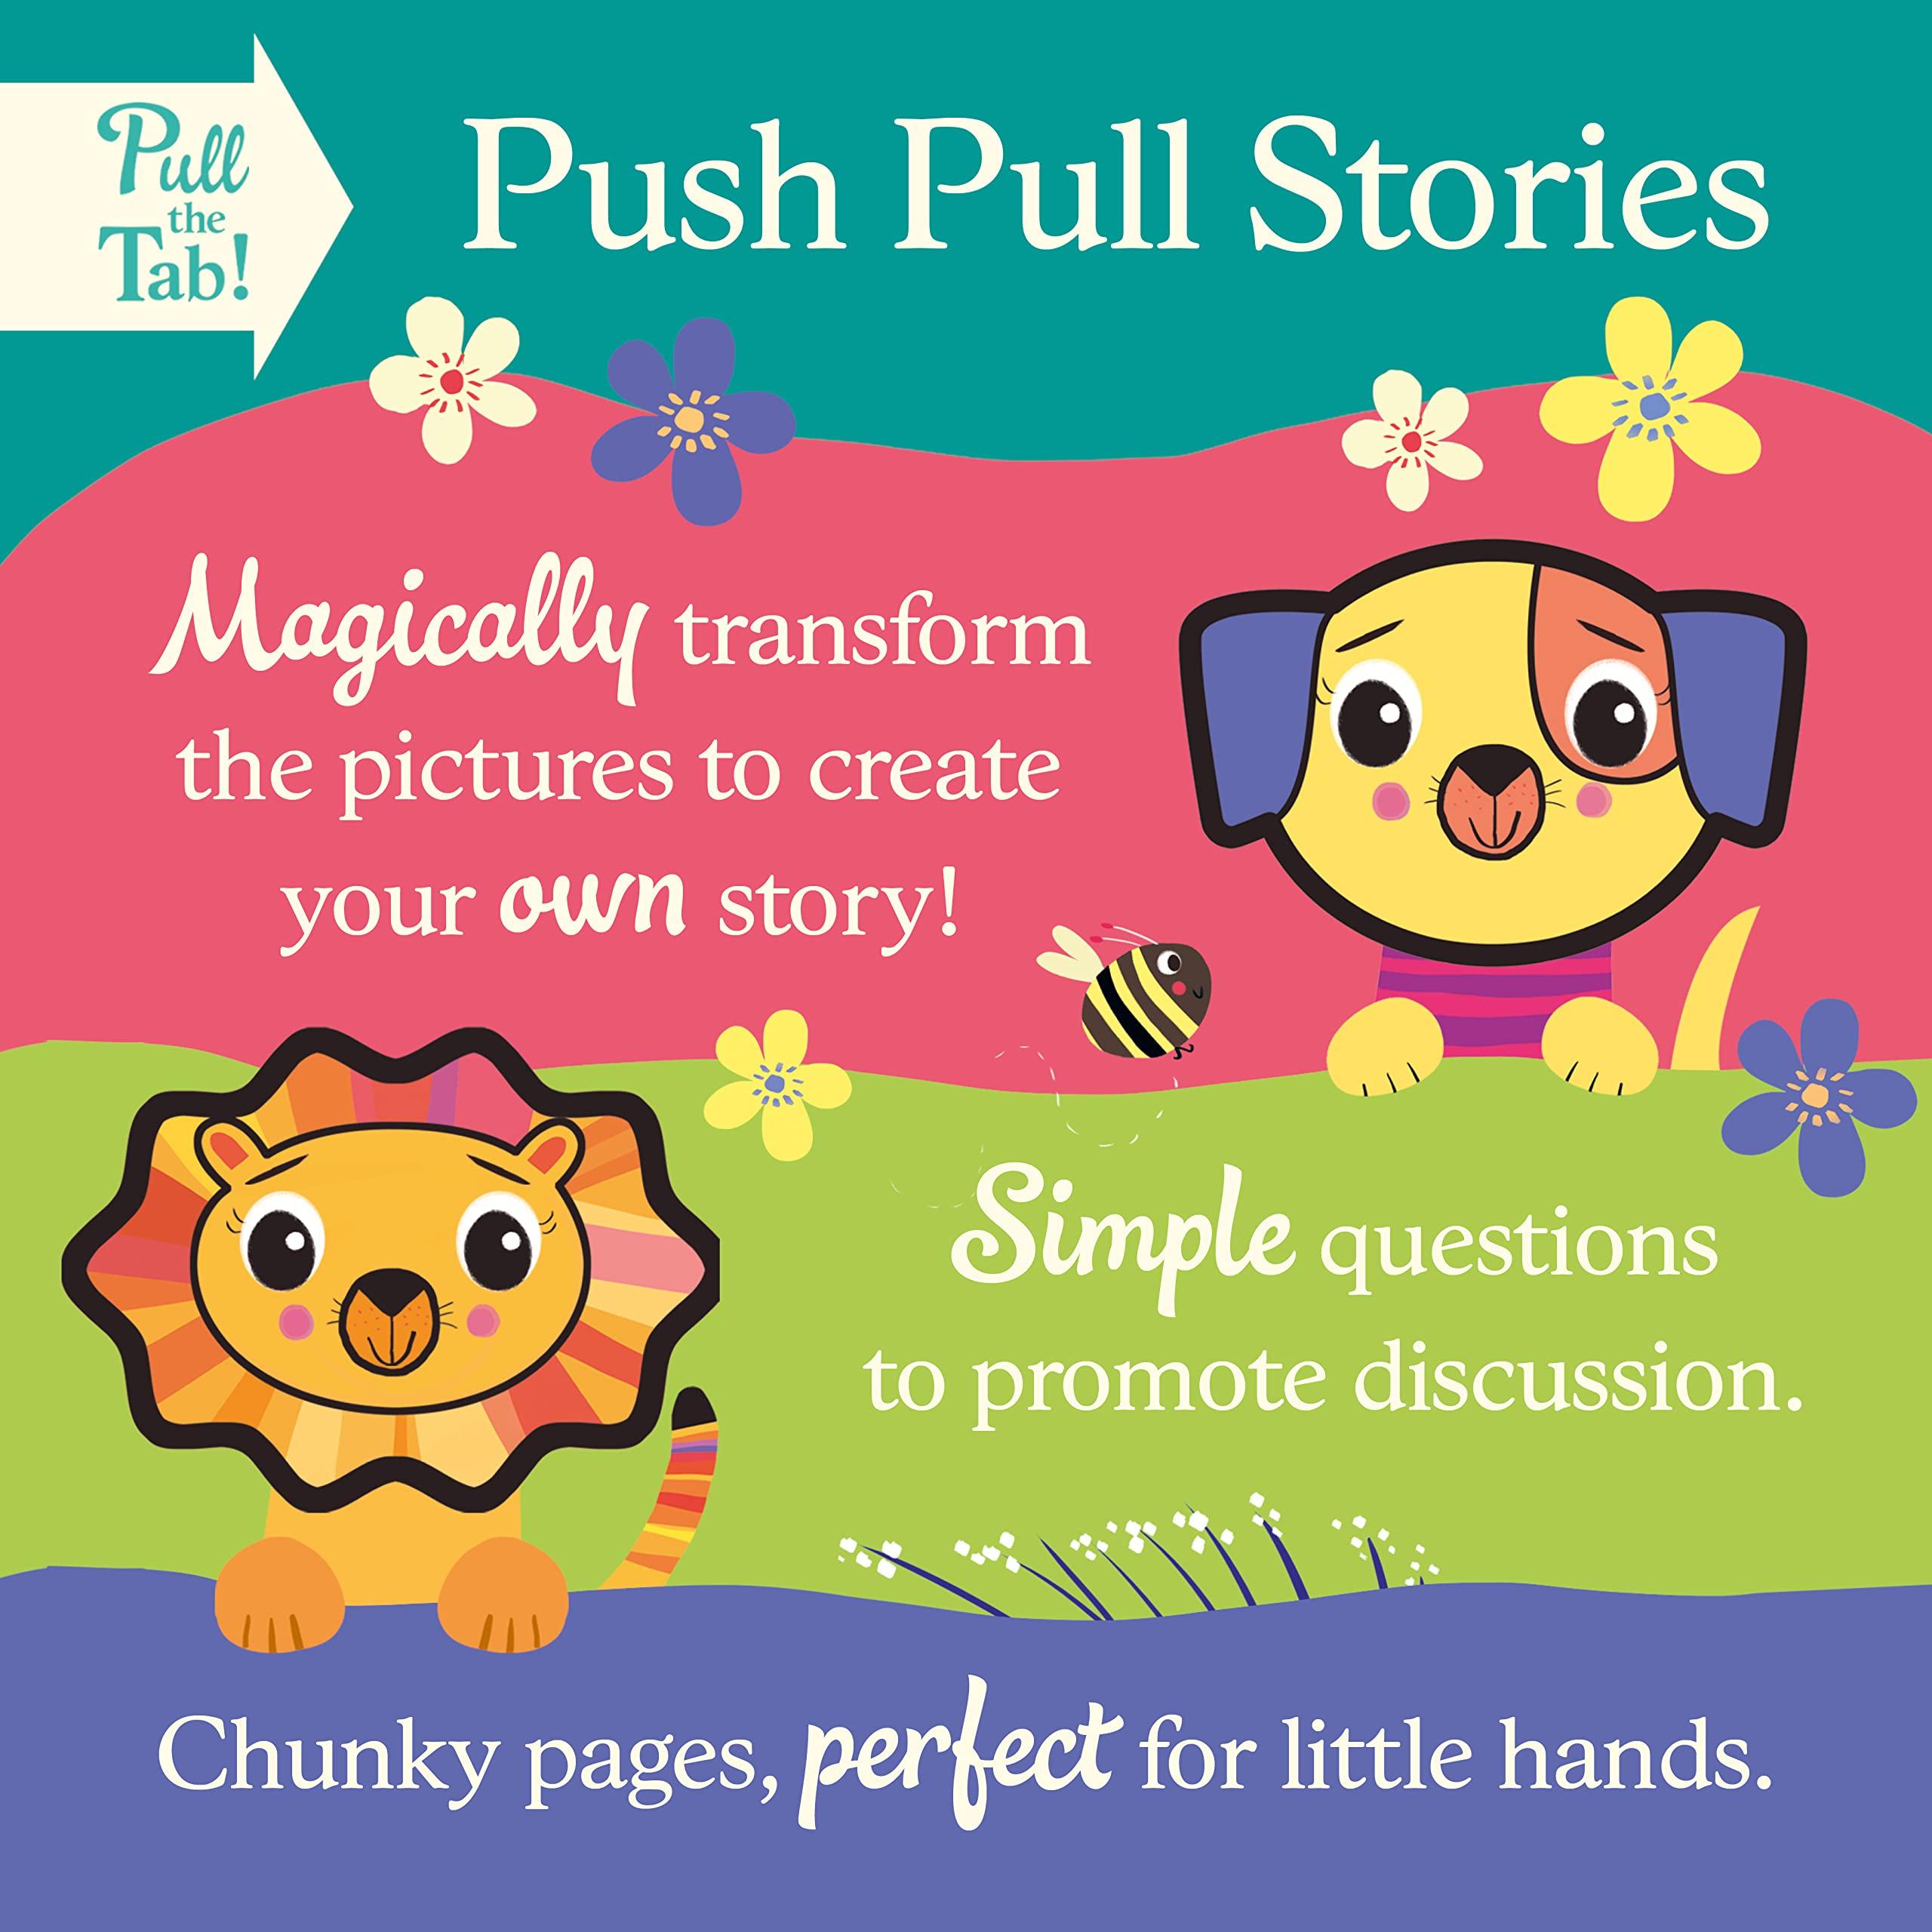 A Busy Day For Little Dog (Push Pull Stories)